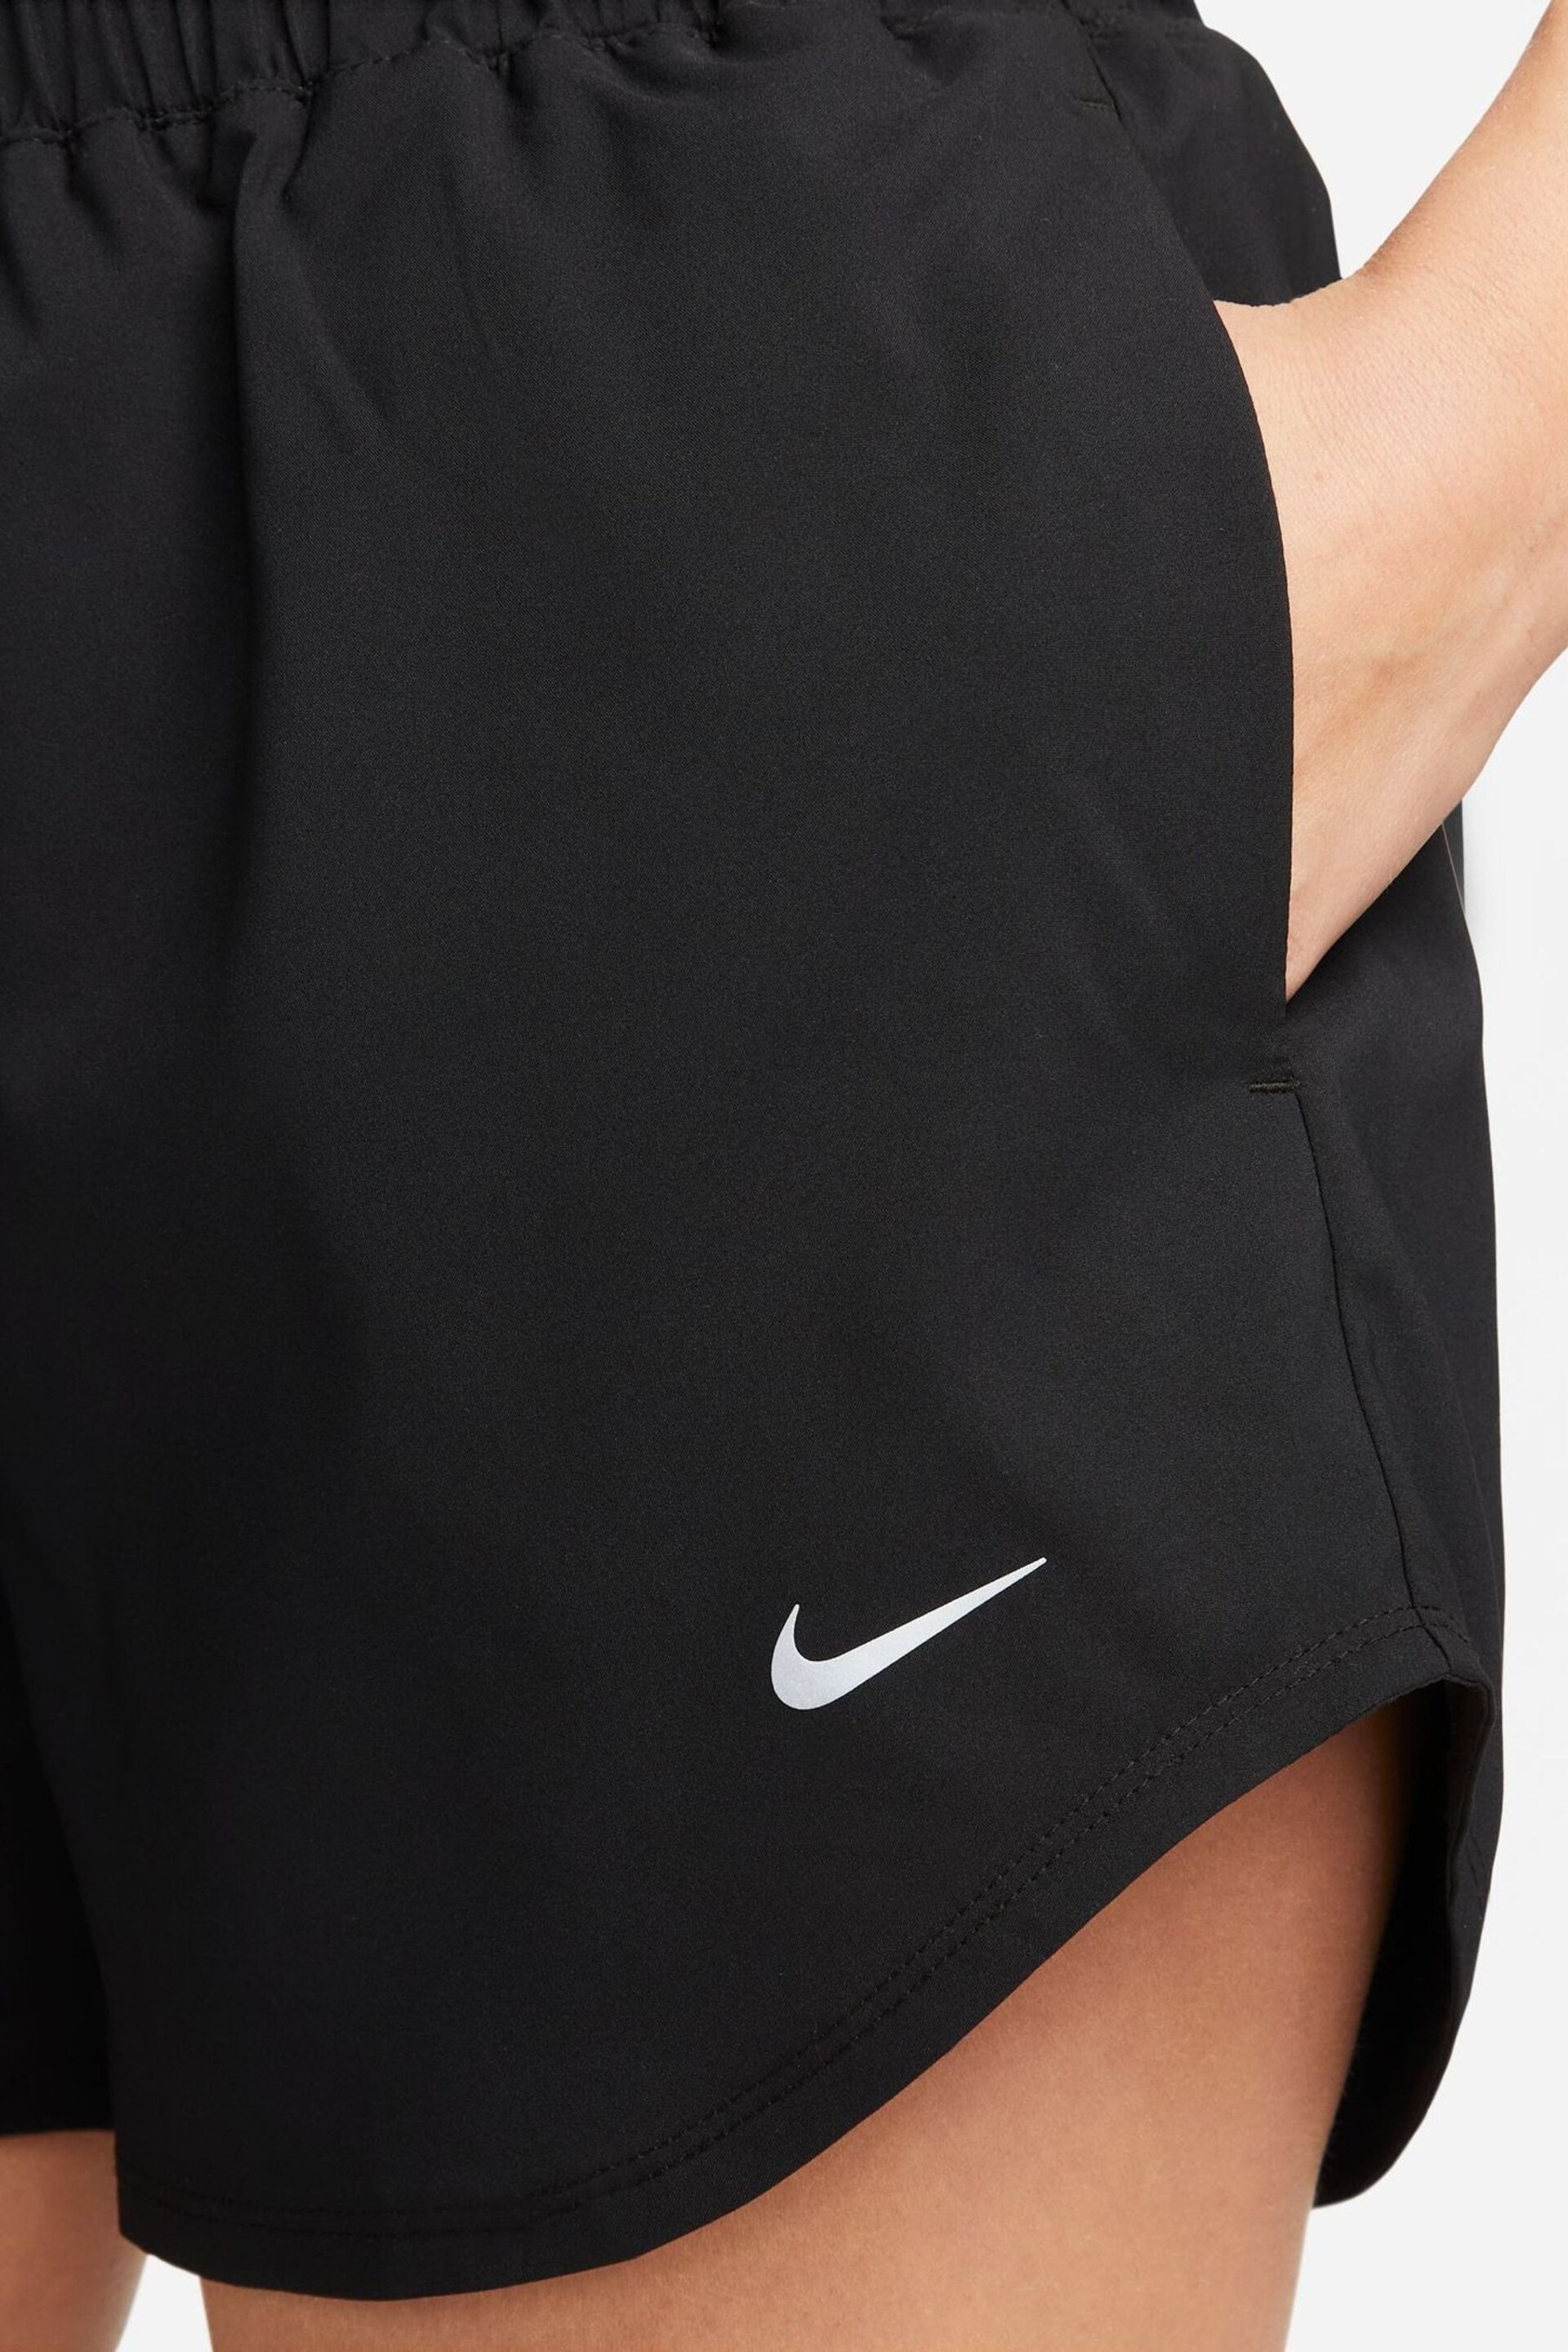 Nike Black One Dri-Fit Ultra High Waisted 3 Inch Brief Lined Shorts - Image 4 of 7